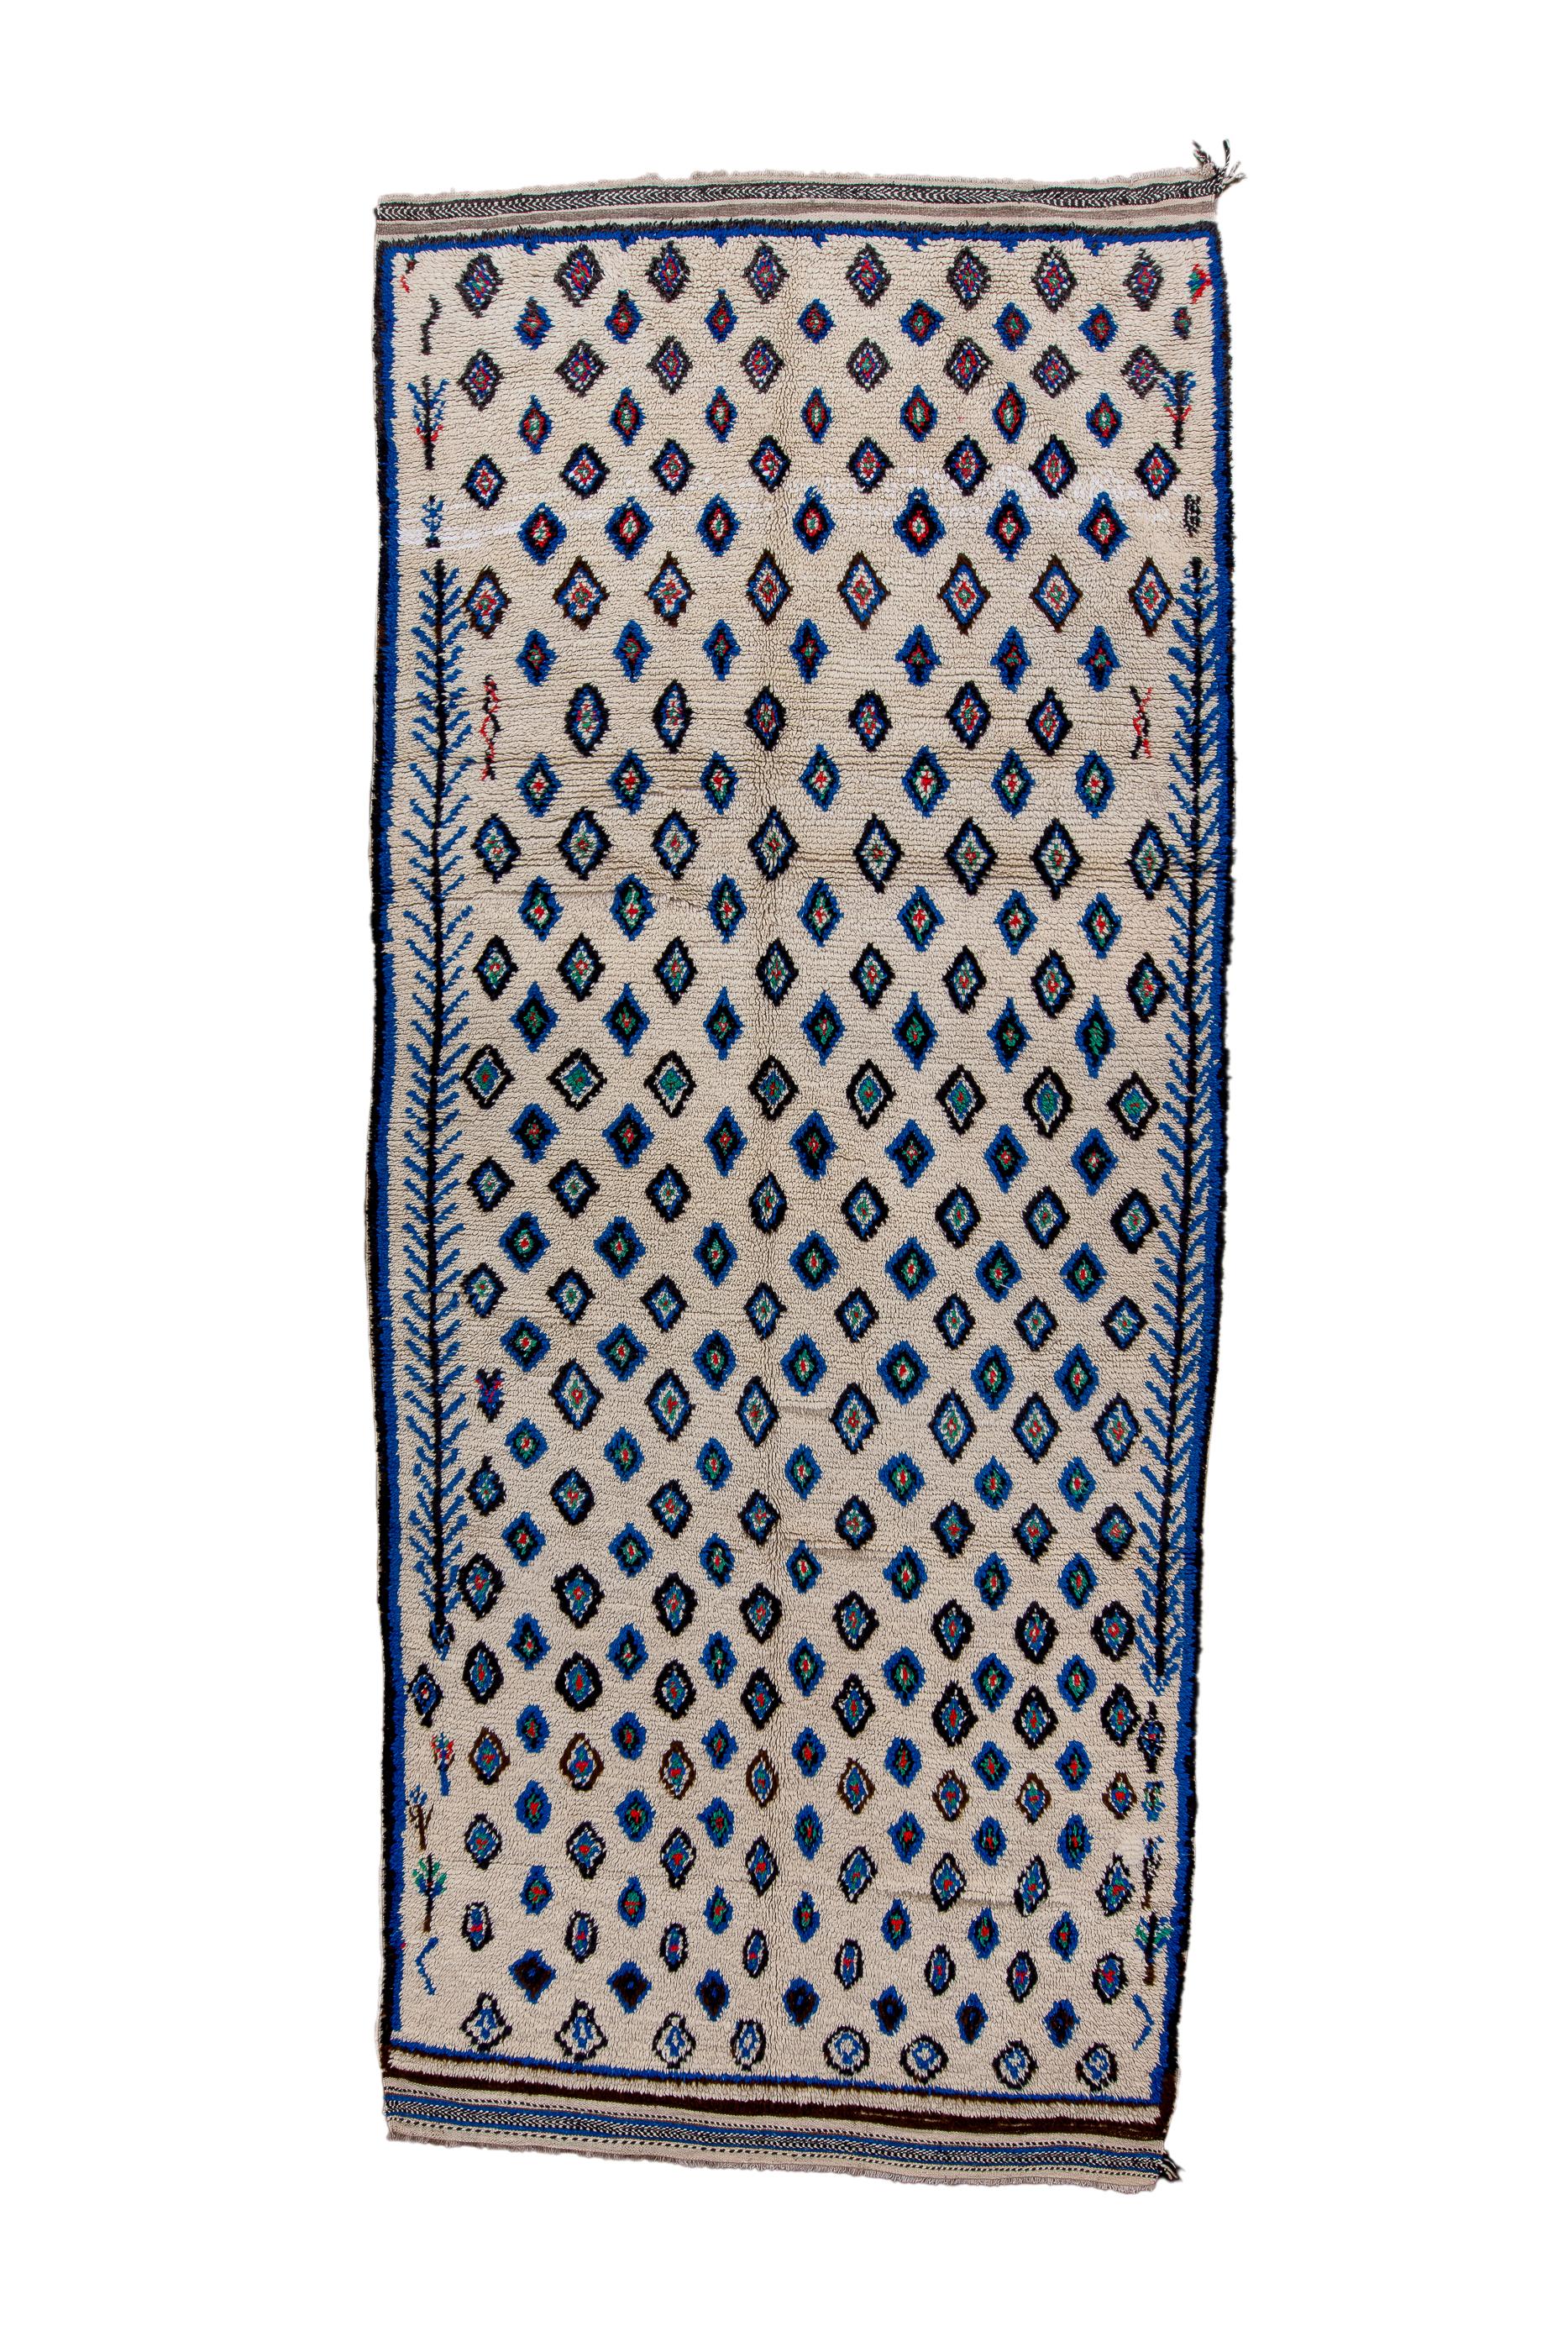 The ecru field shows a repeating, offset pattern of irregular, charming small lozenges, forming an offset lattice, with long herringbones up the sides. Striped flatwoven finishes at each end.  Blue and dark brown accents overall. Semi-vegetal shapes